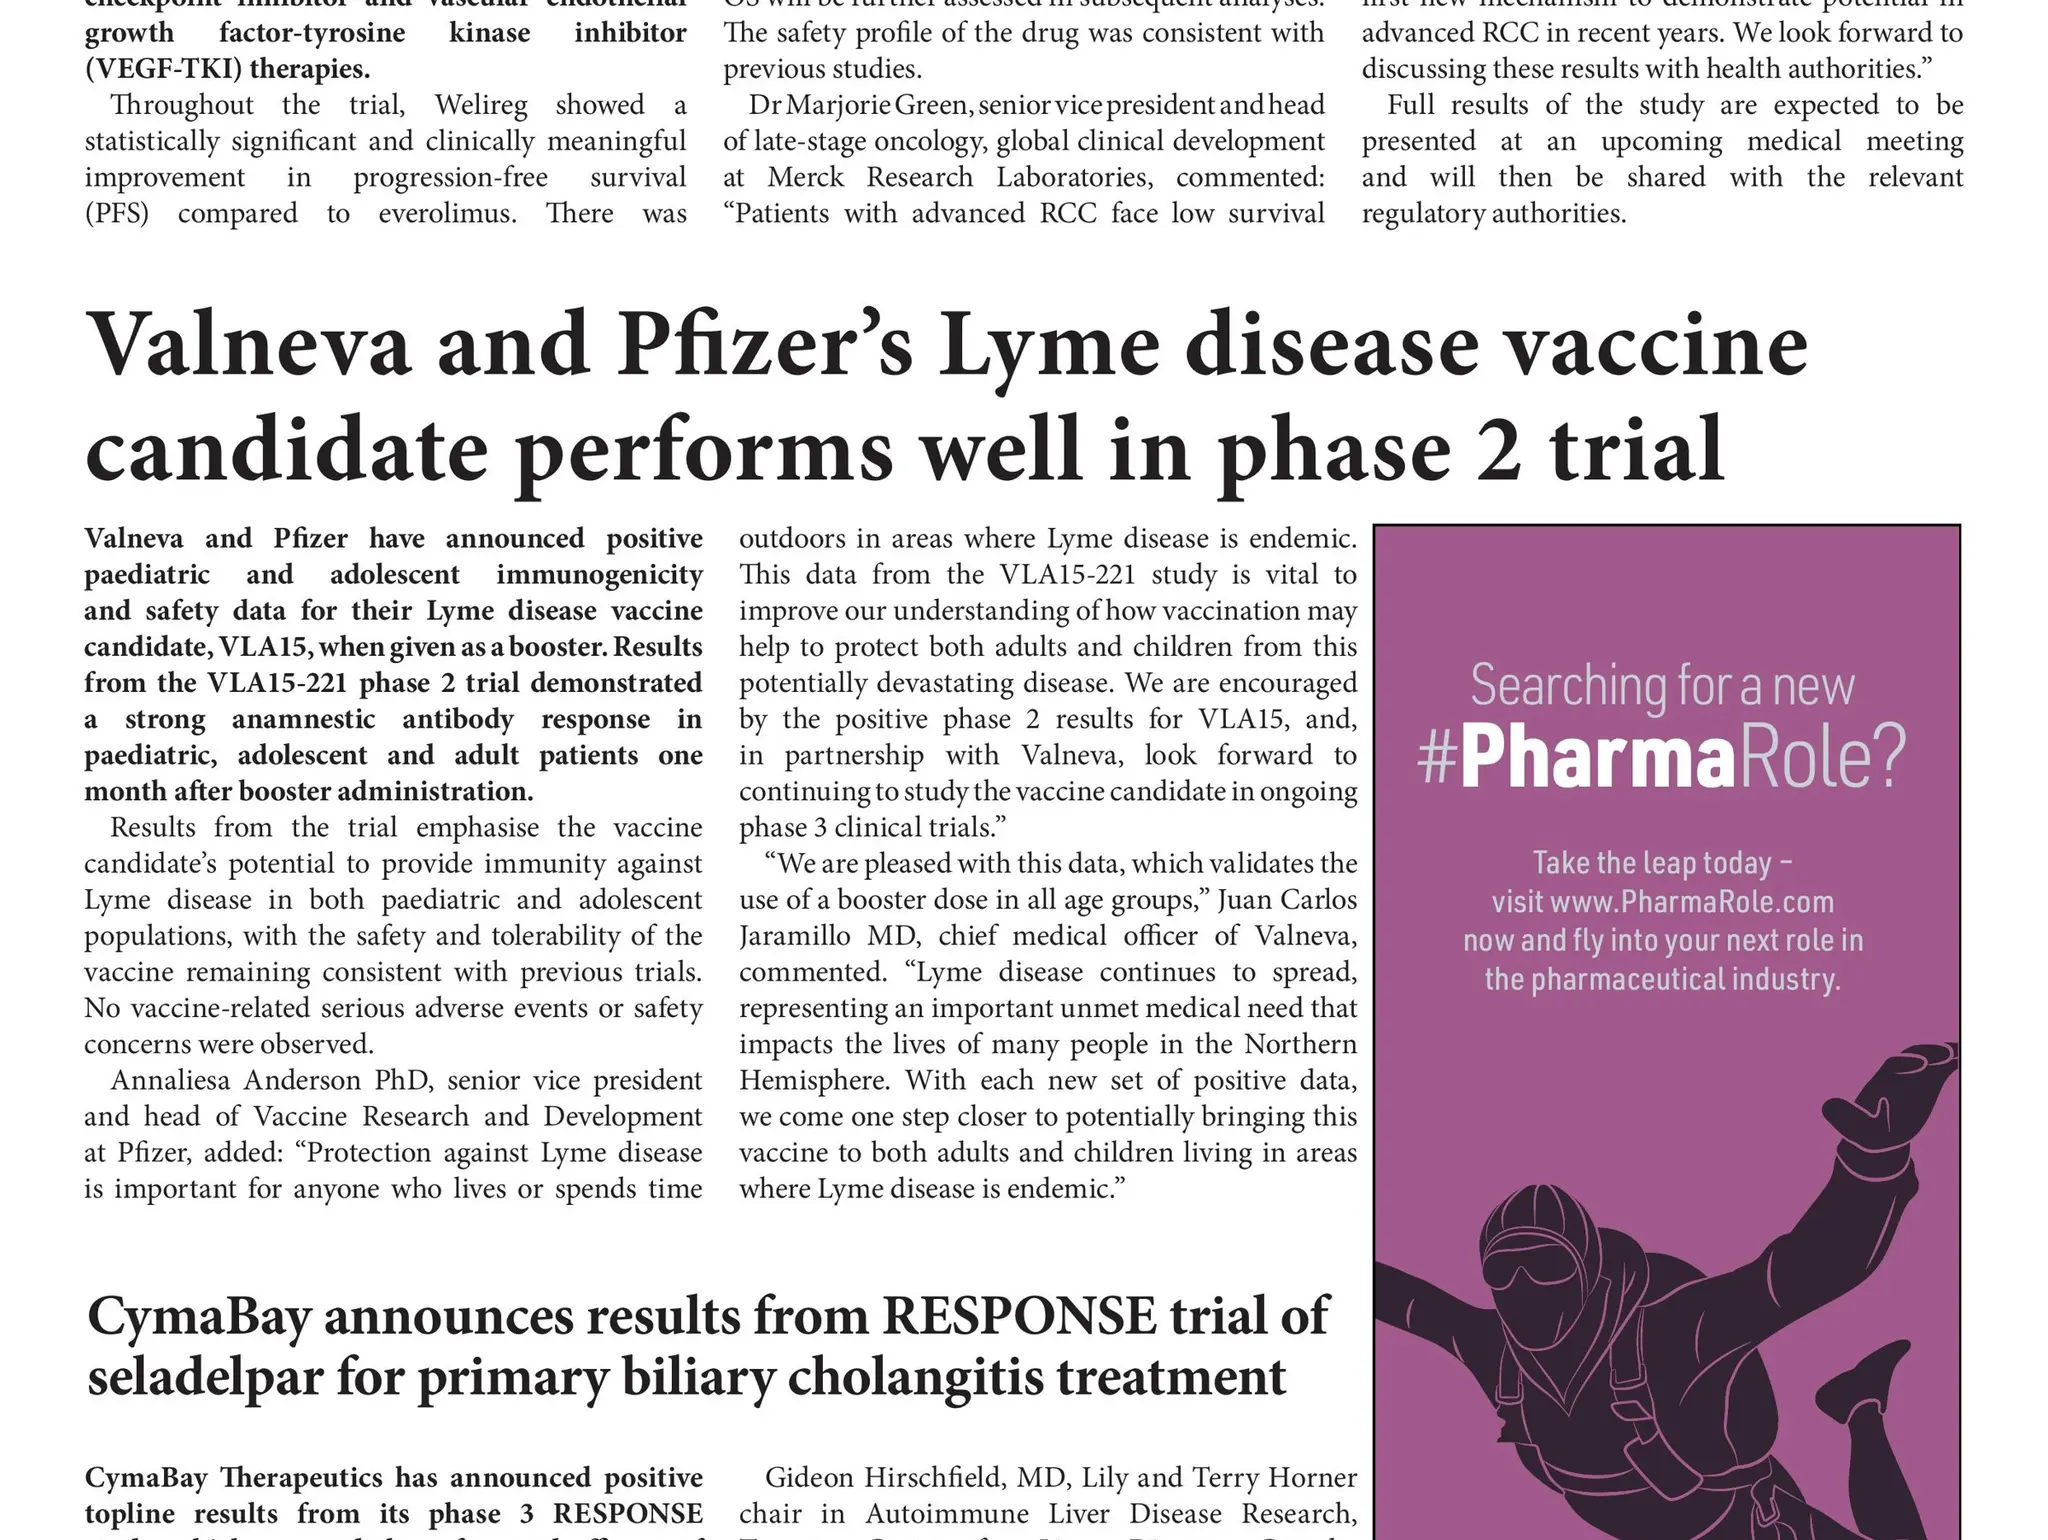 Valneva and Pfizer’s Lyme disease vaccine candidate performs well in phase 2 trial